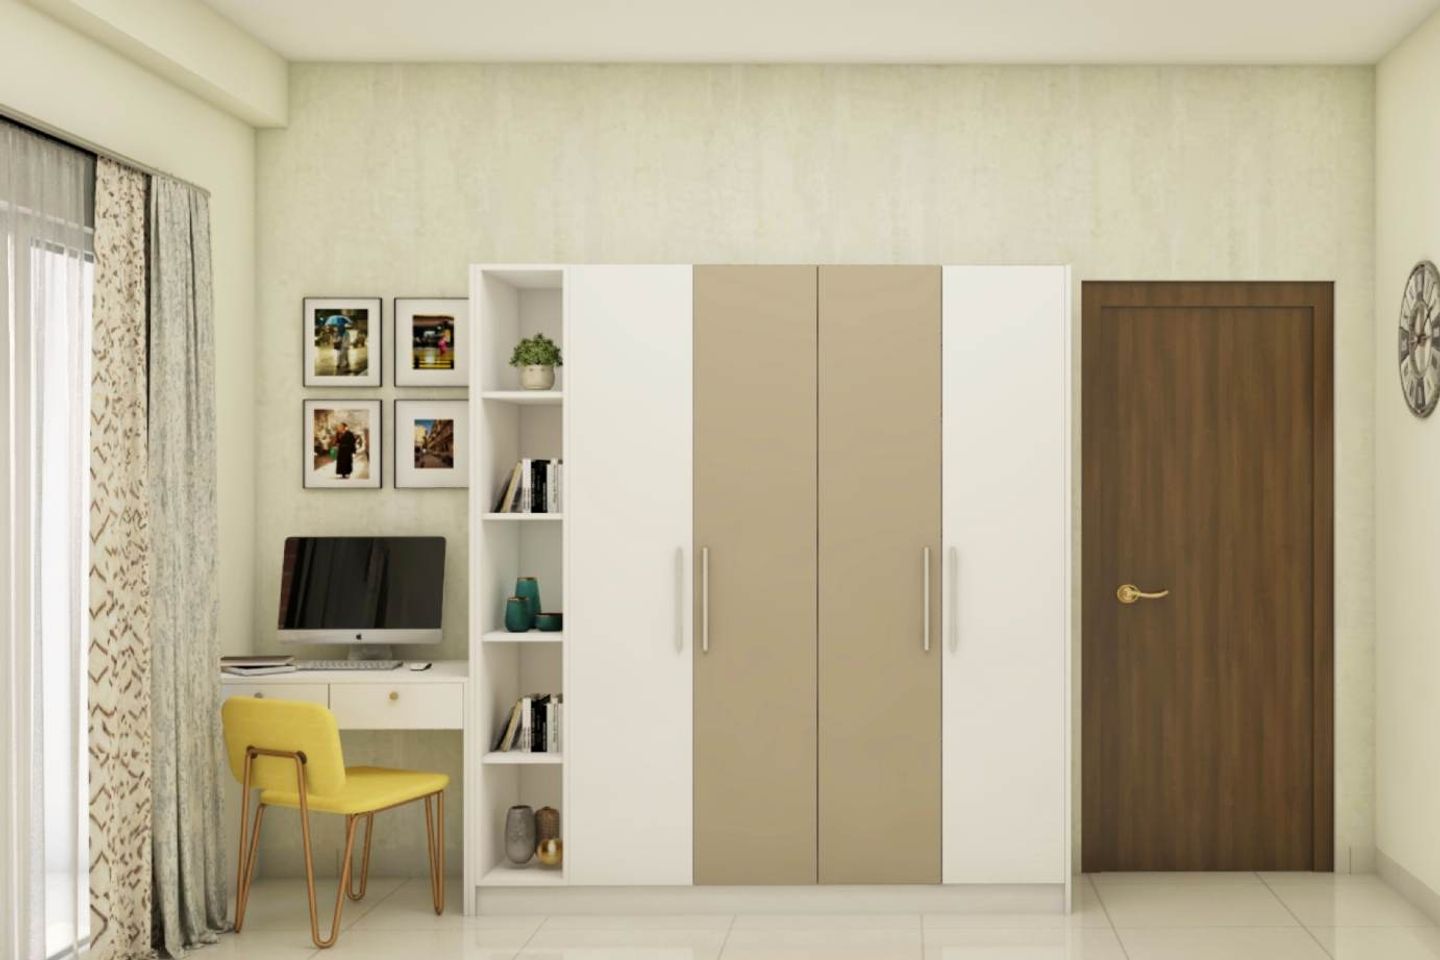 Study Room Design With Beige And White Wardrobe - Livspace